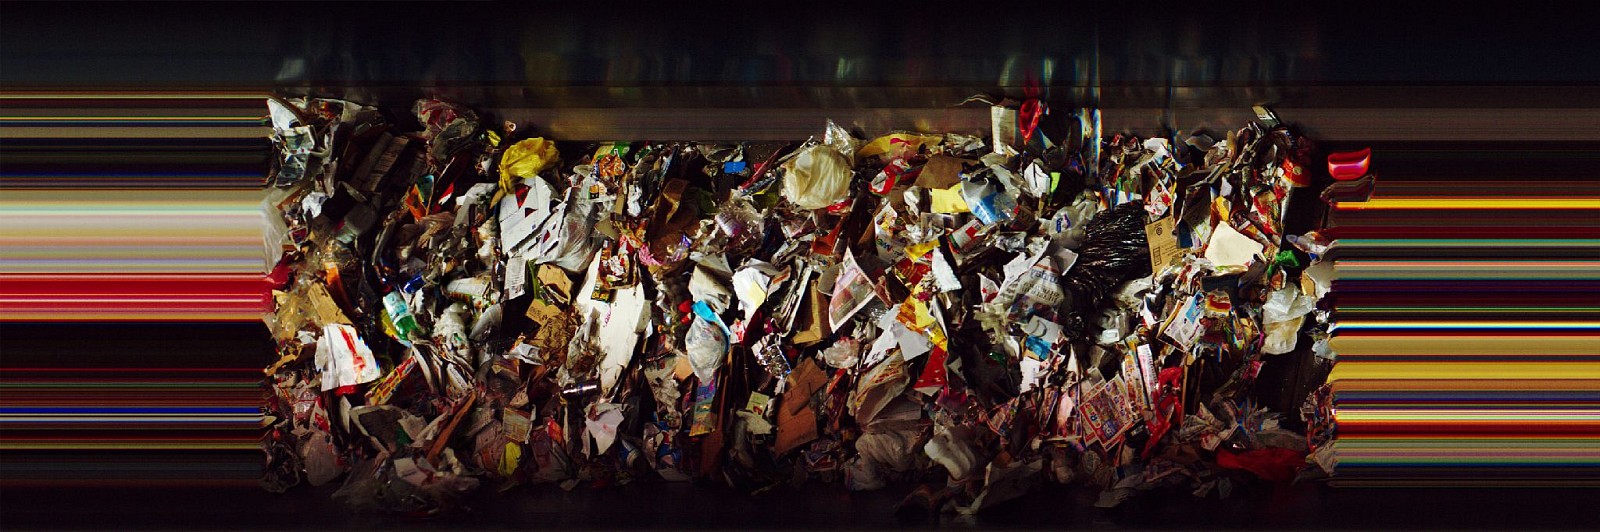 Jay Mark Johnson, WASTE NOT WHATNOT #5, 2013 Freemont Garbage
archival pigment on paper, mounted on aluminum, 40 x 120 in. (101.6 x 304.8 cm)